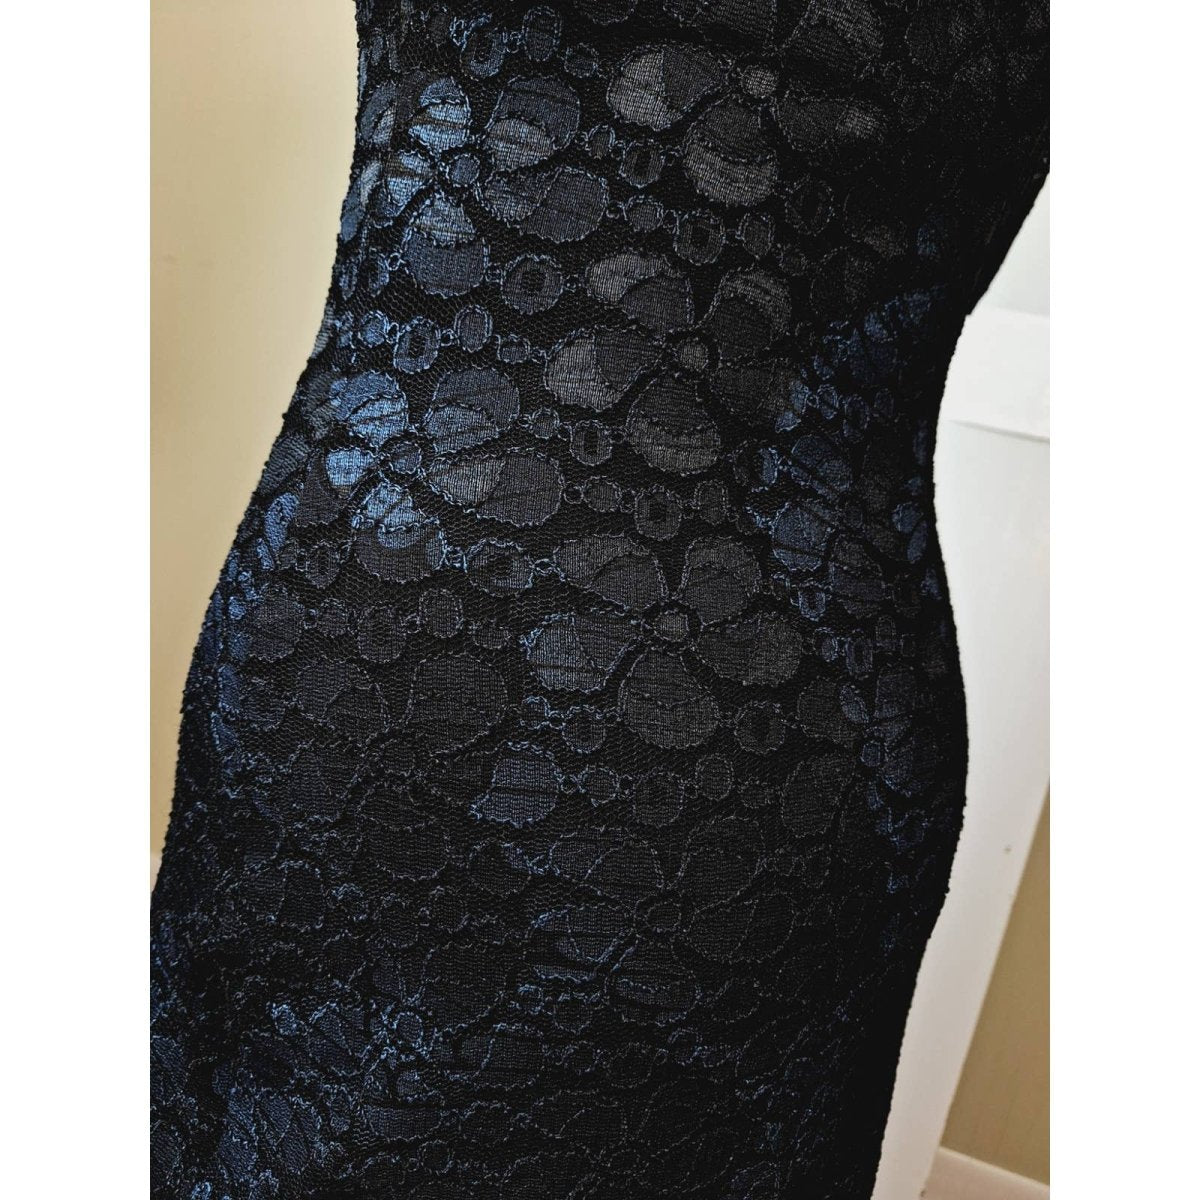 Badgley Mischka Floral Mermaid Lace Bodycon Dress Size 12 Large - themallvintage The Mall Vintage